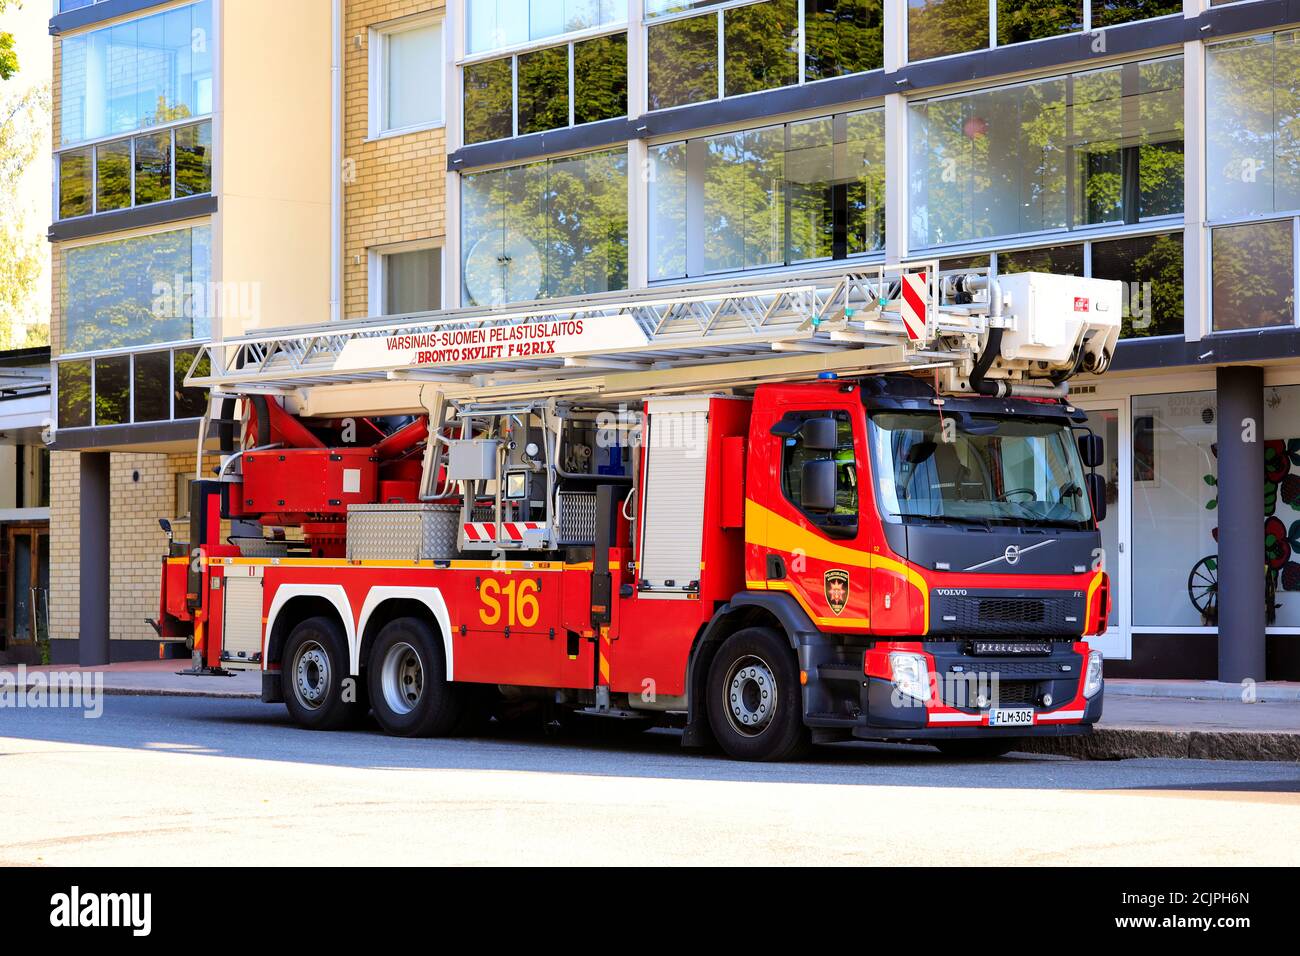 Volvo FE fire truck with Bronto F42RLX Skylift aerial ladder platform parked on city street. Salo, Finland. August 16, 2020. Stock Photo